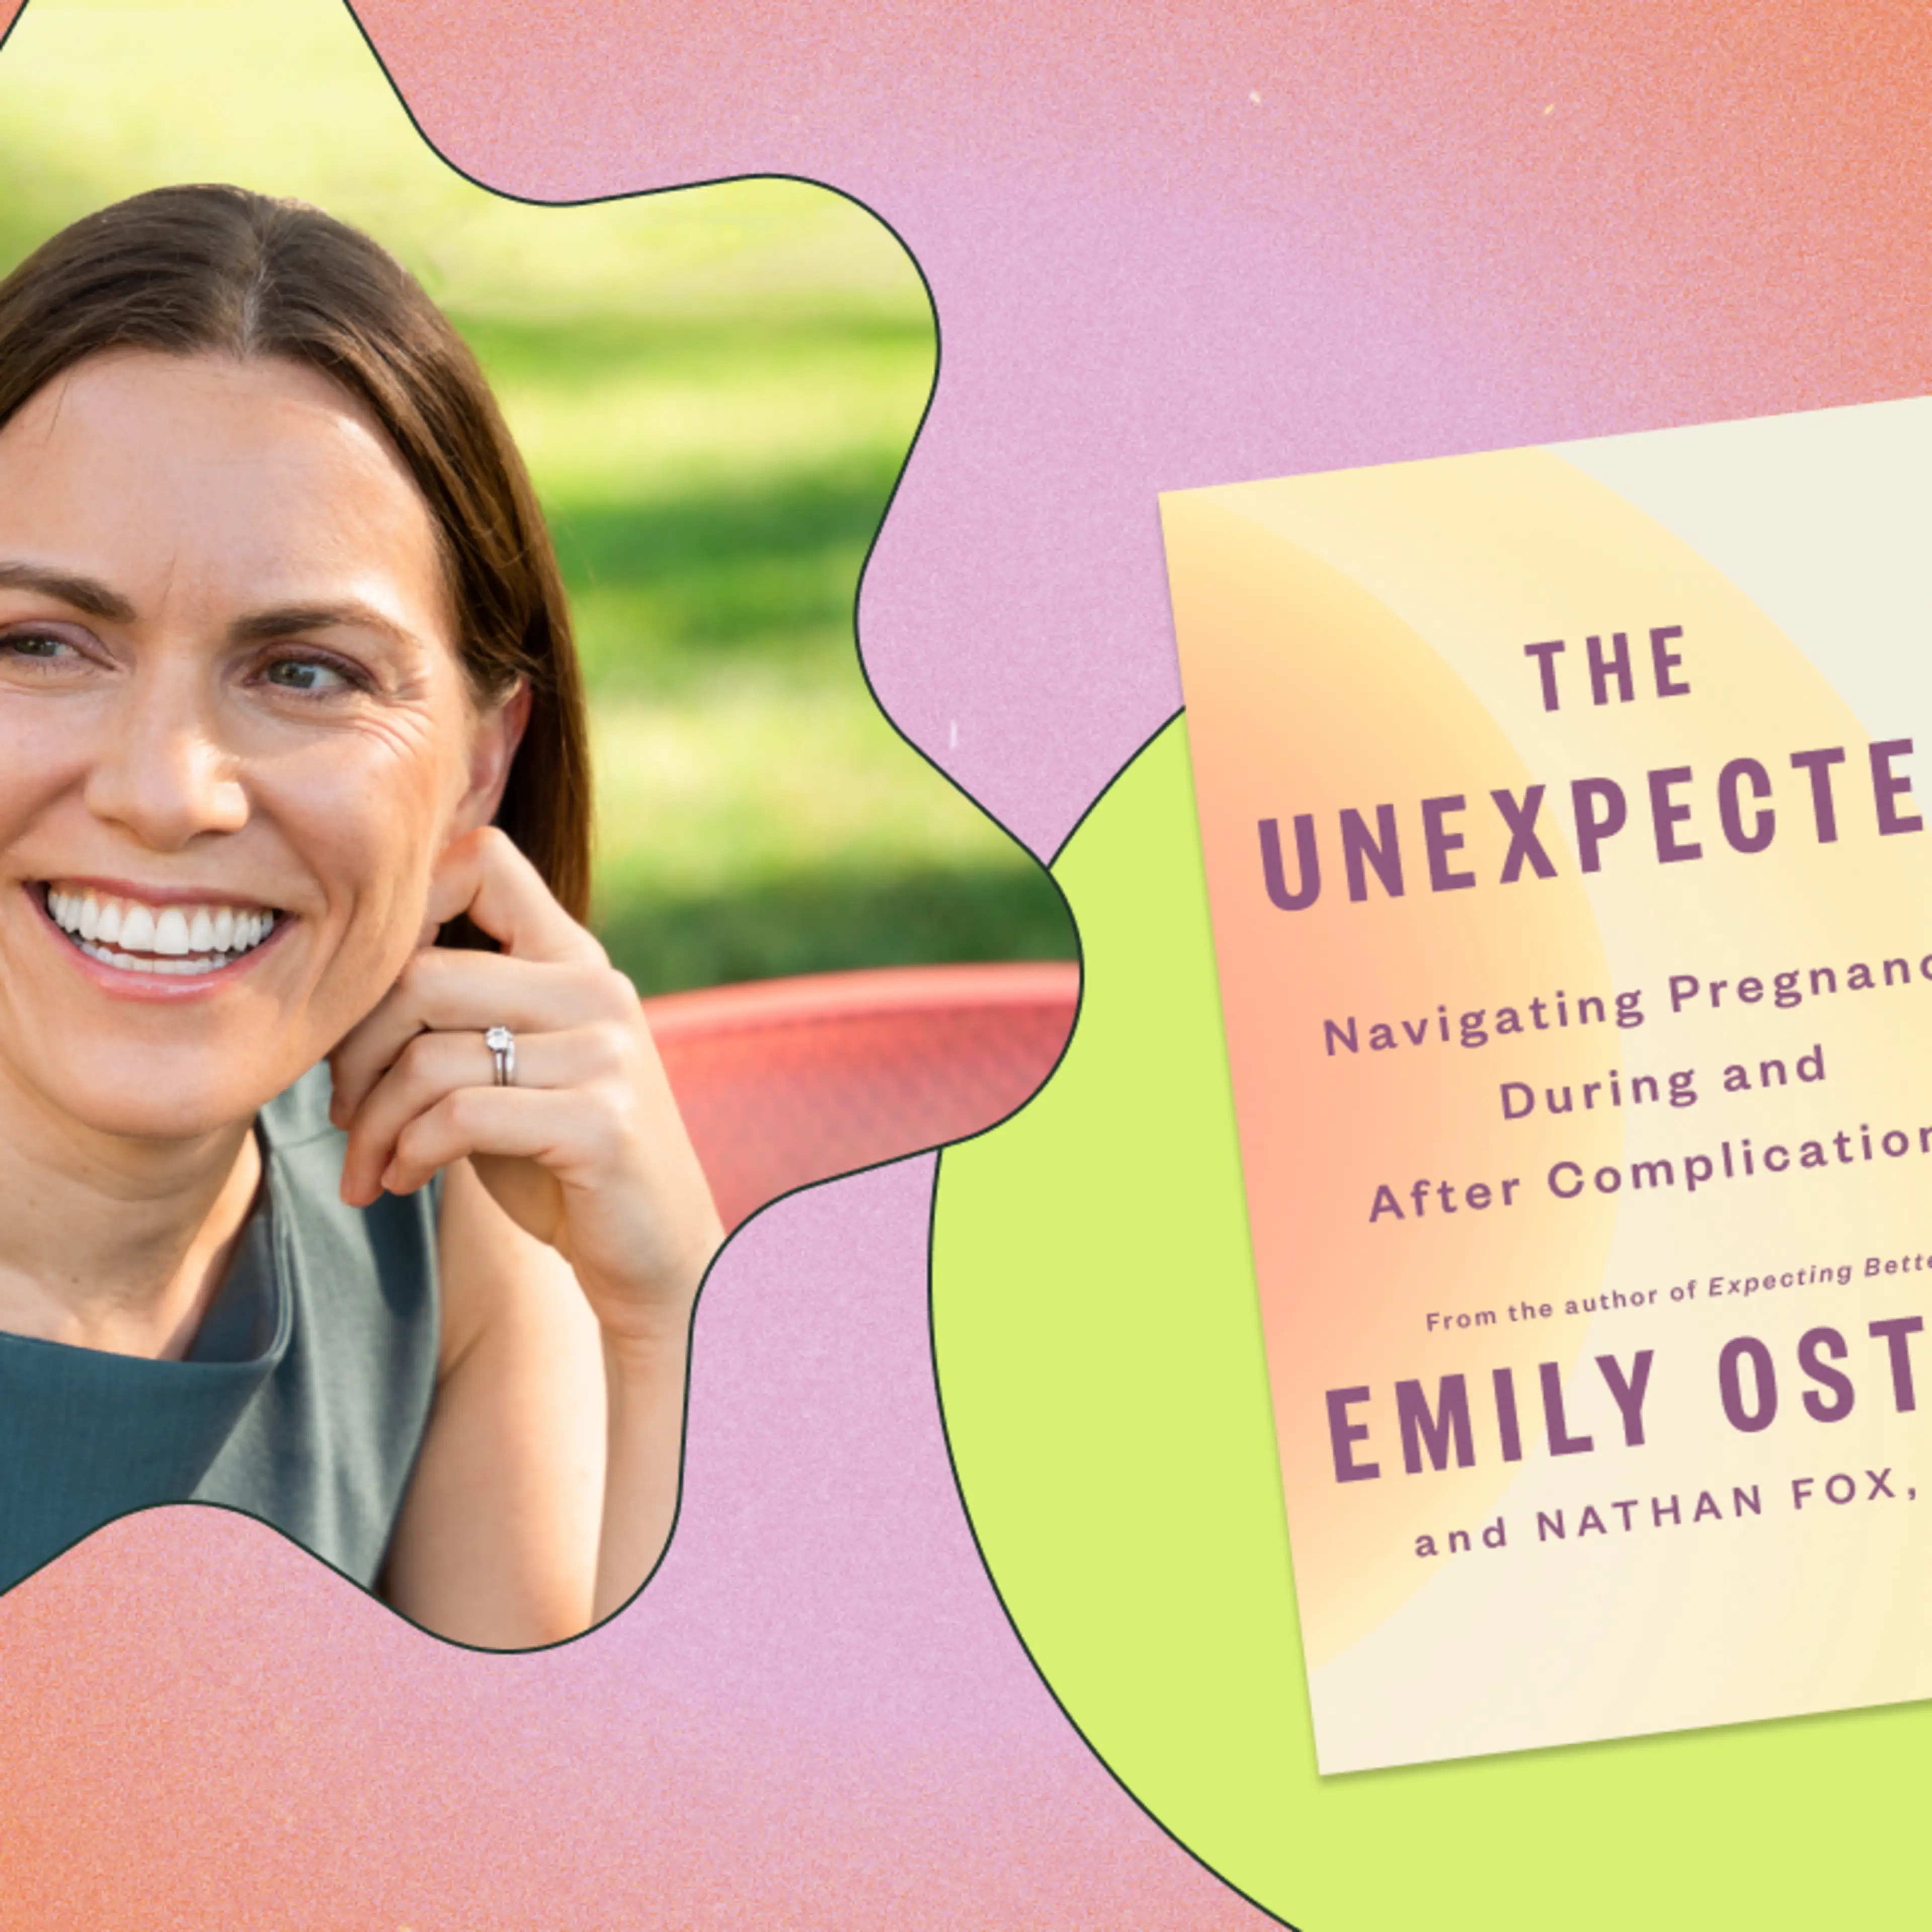 Emily Oster Shares Her Strategies for Preparing for the Unexpected